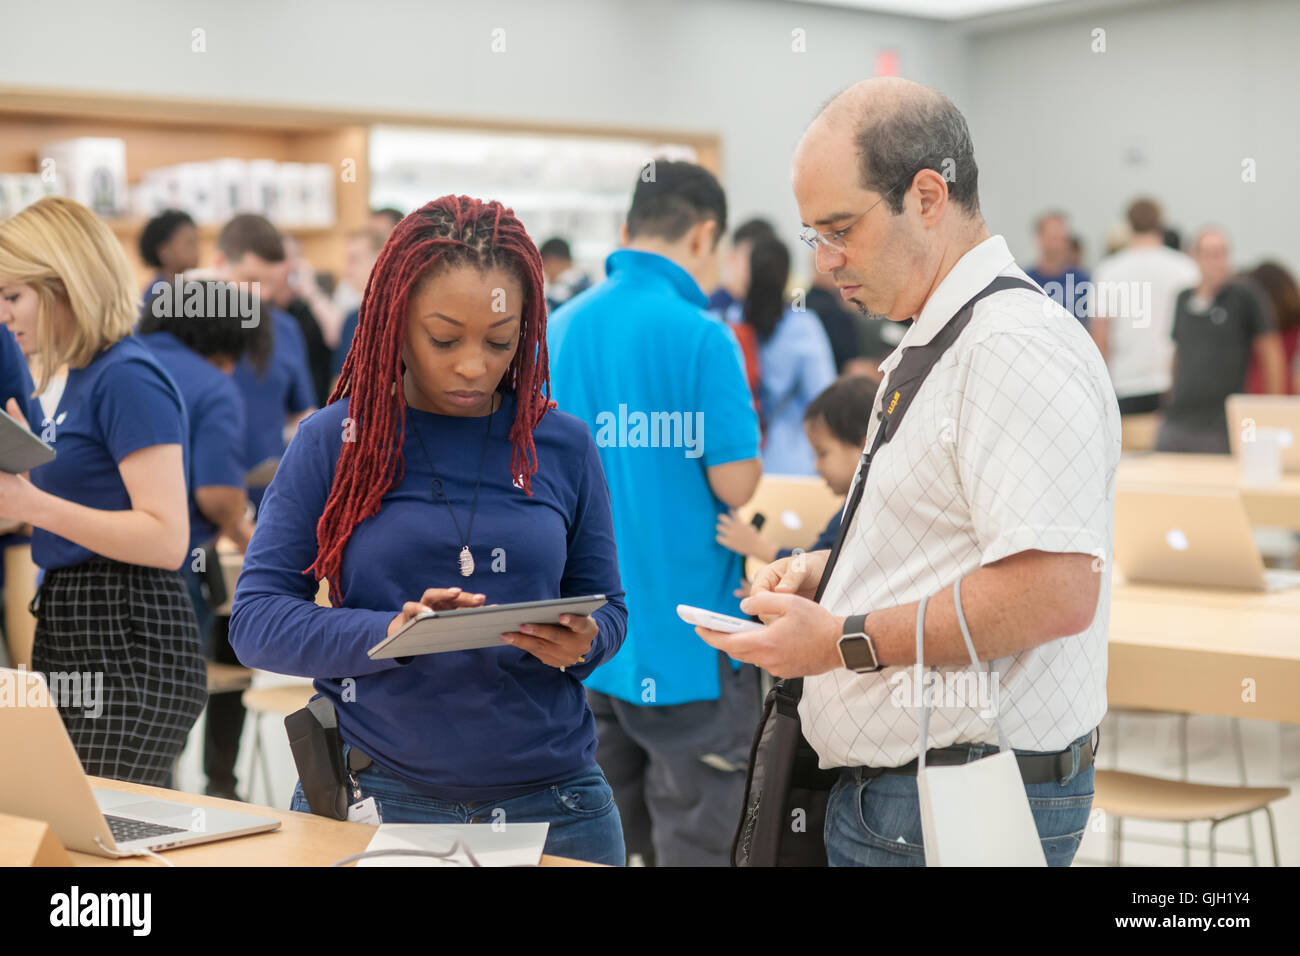 new-york-usa-16th-august-2016-apple-enthusiasts-and-visitors-in-the-GJH1Y4.jpg